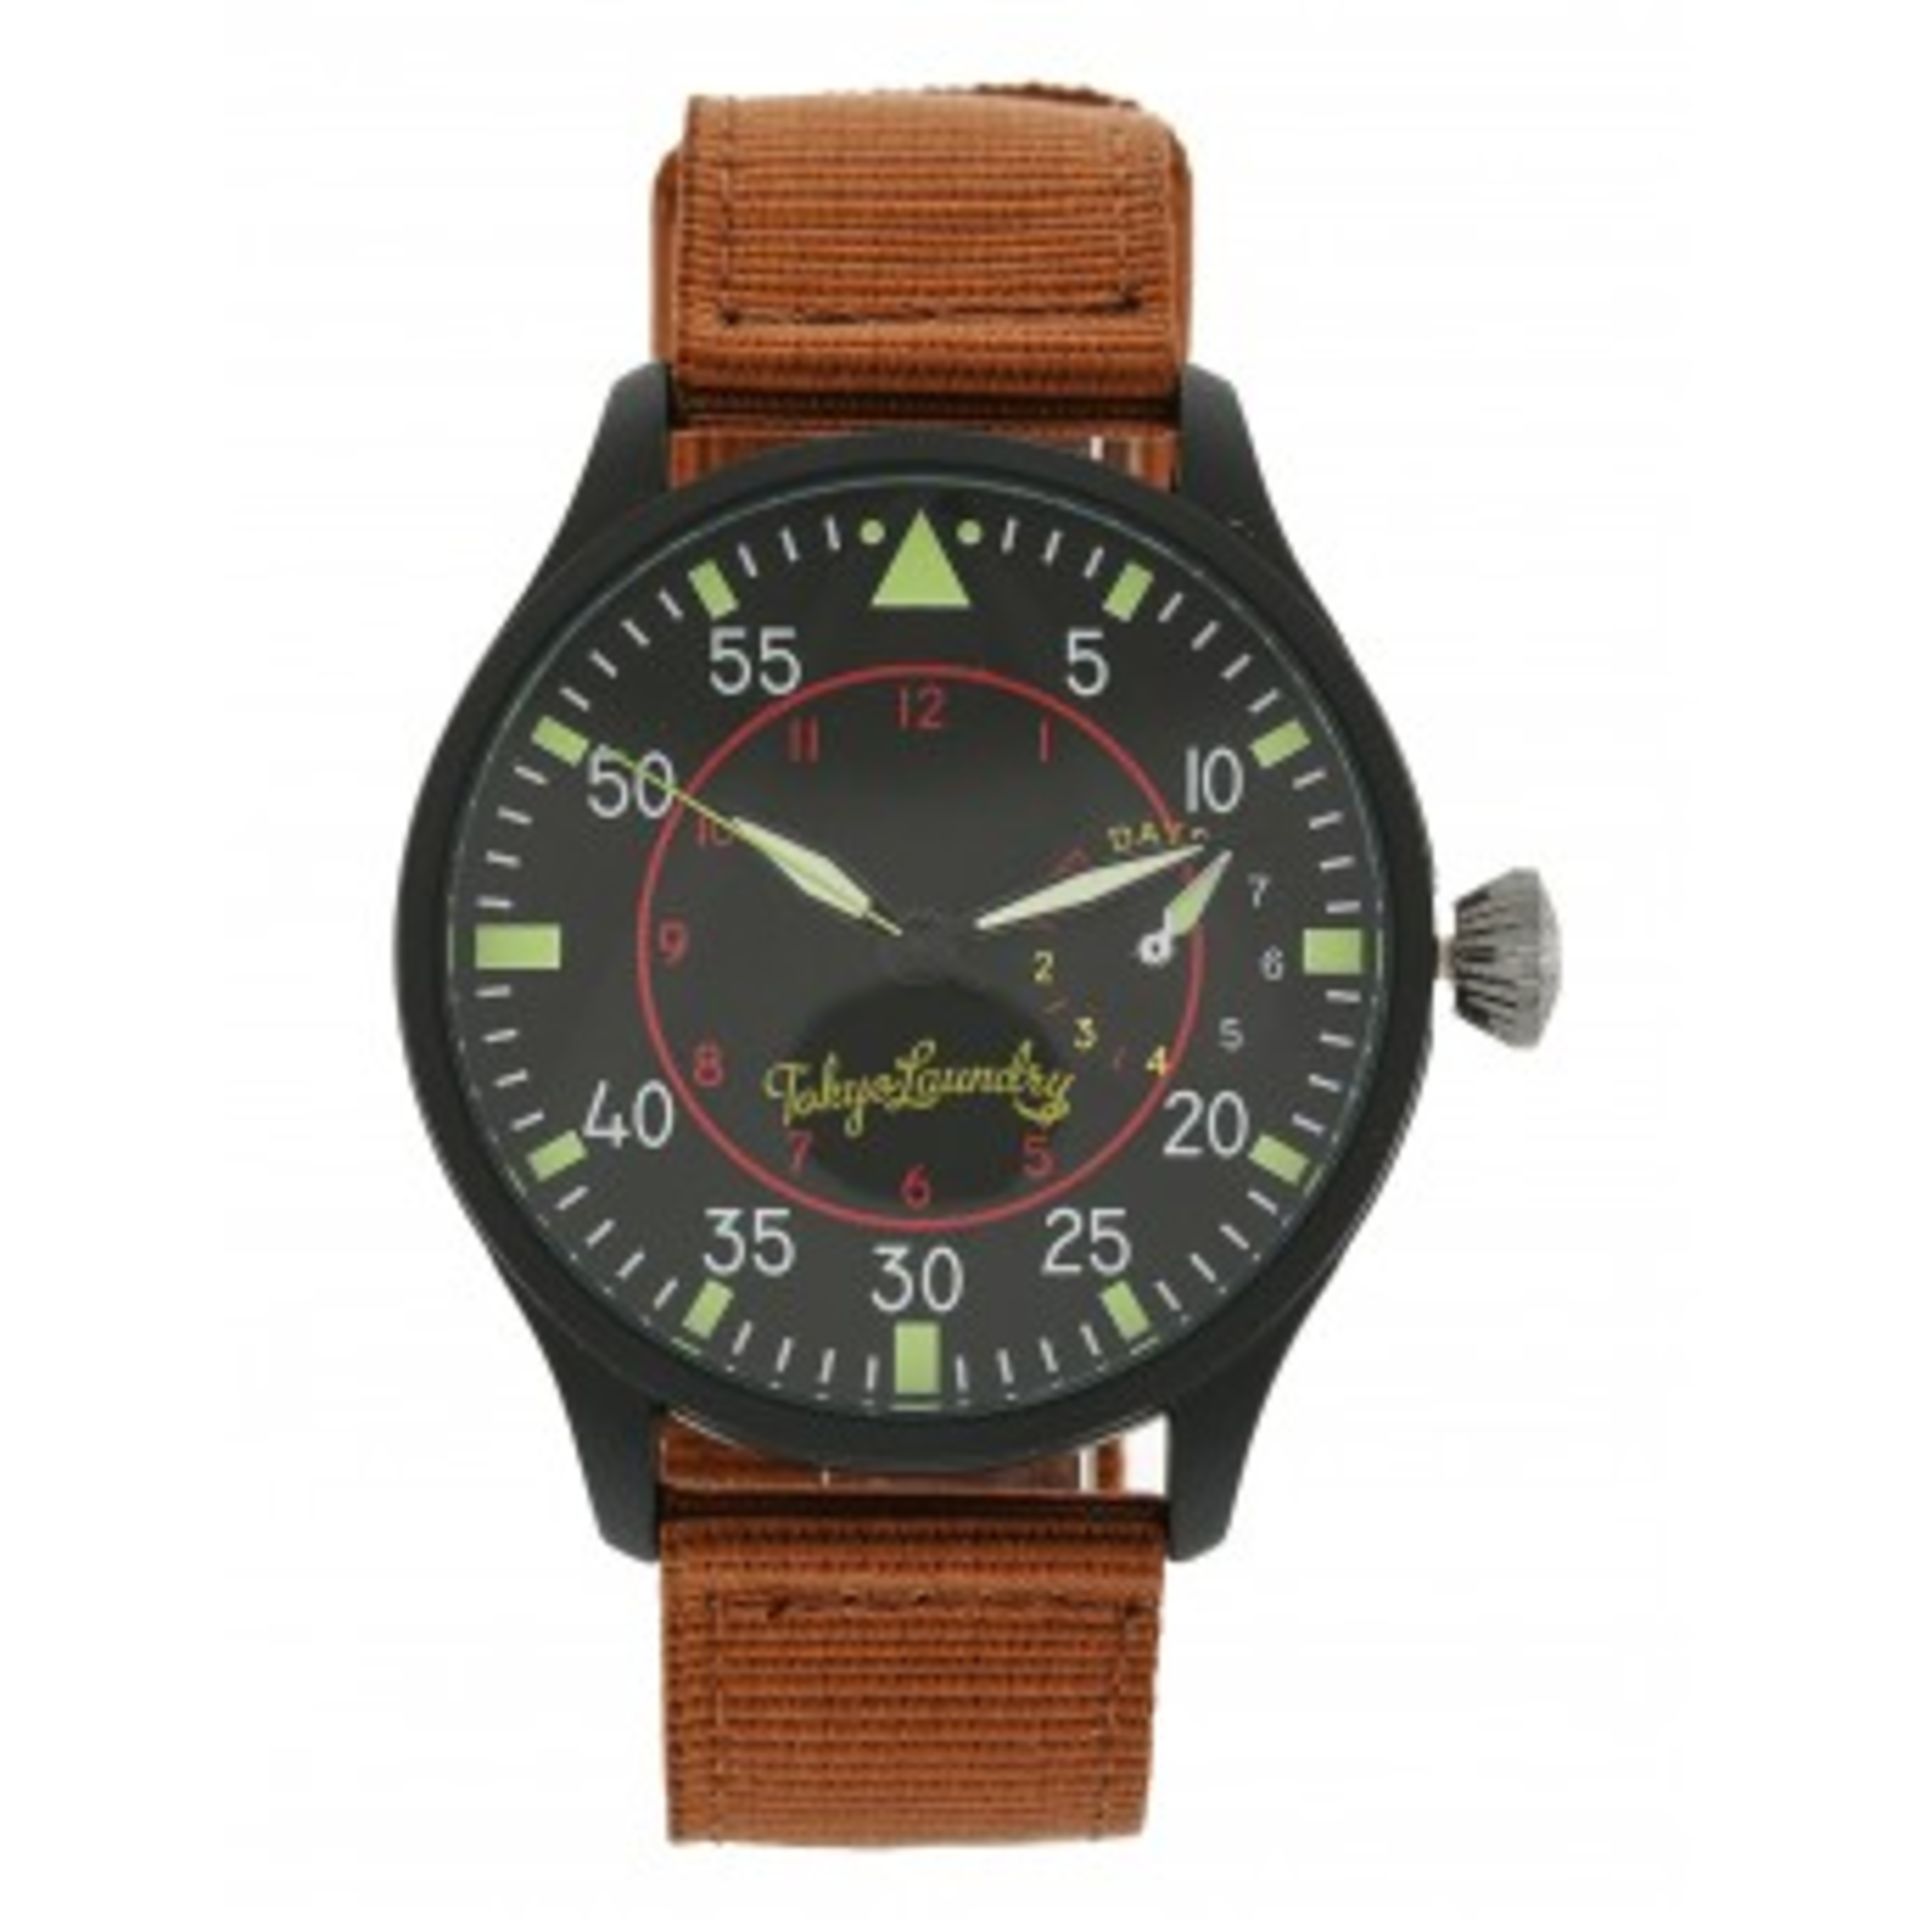 V Brand New Gents Tokyo Laundry Doyle Military Style Analogue Watch Online Price £24.99 (Toyko